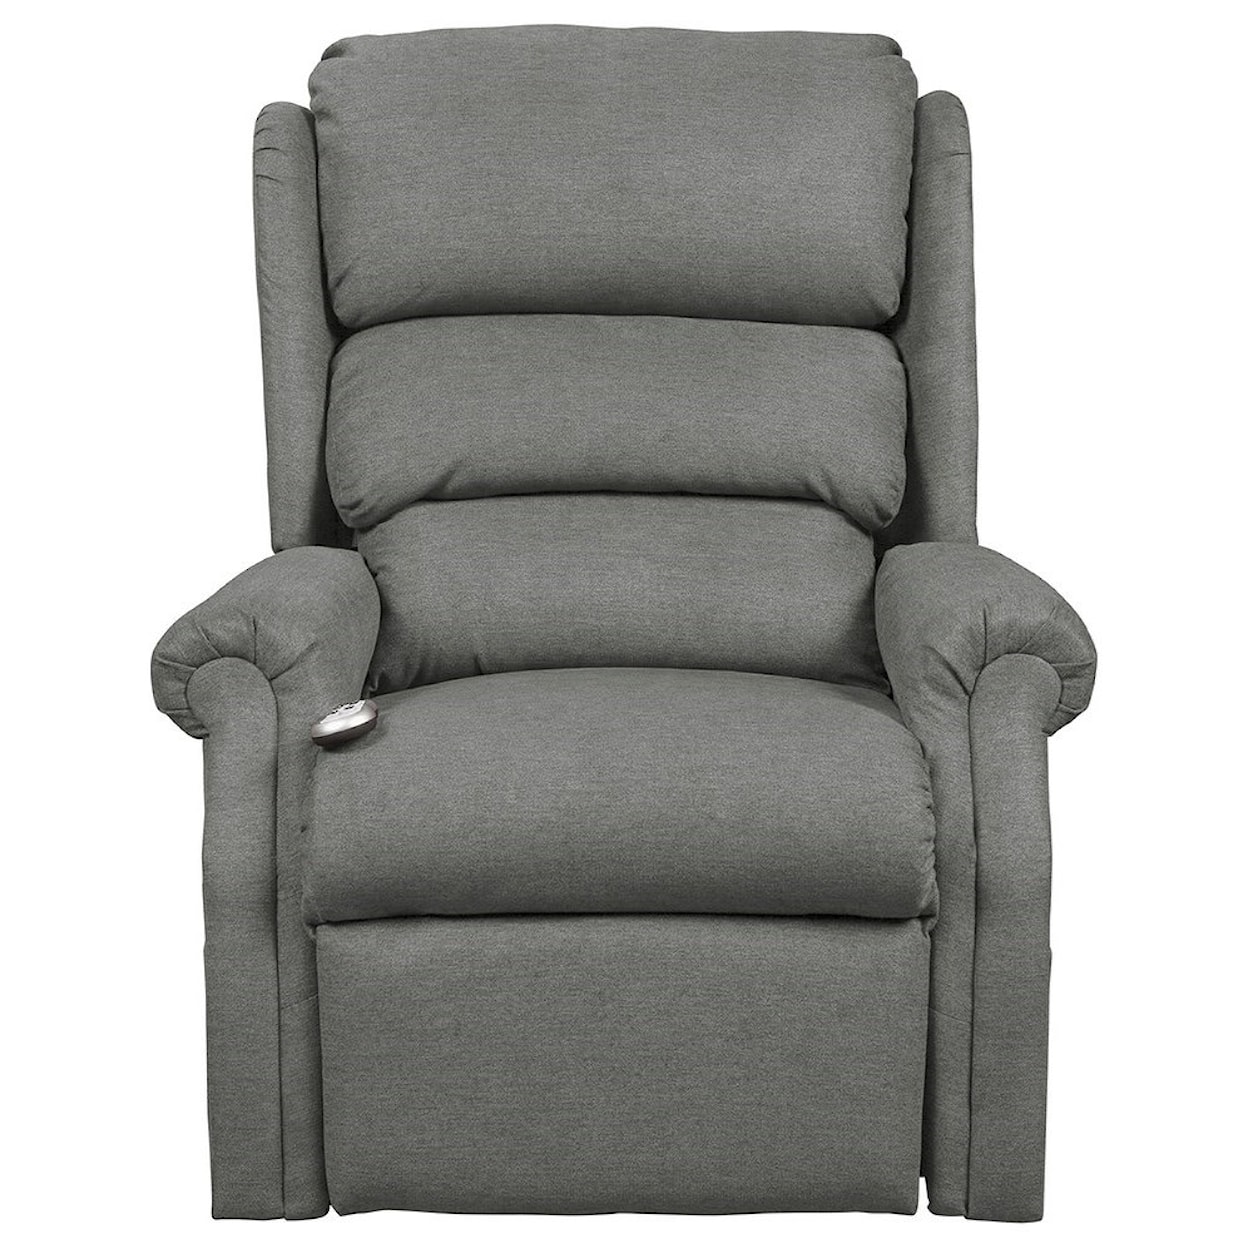 Windermere Motion Lift Chairs Cosmo Chaise Lounger